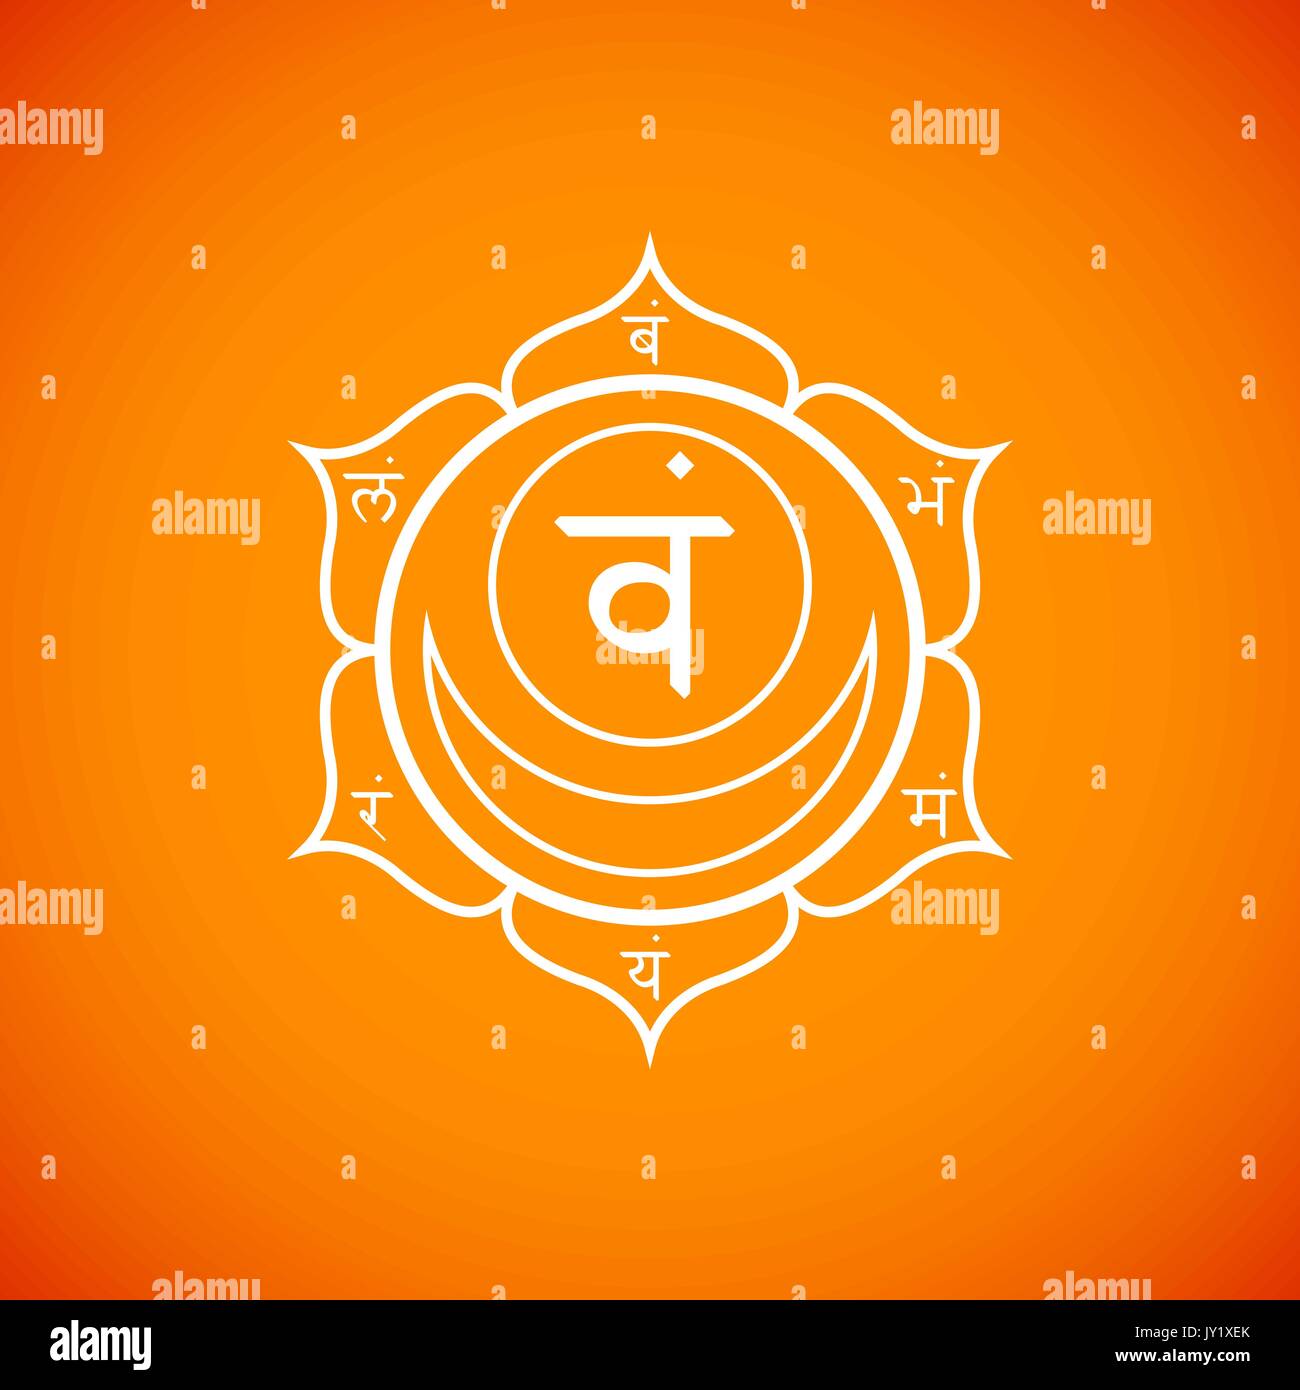 Religion symbo Stock Vector Images - Alamy